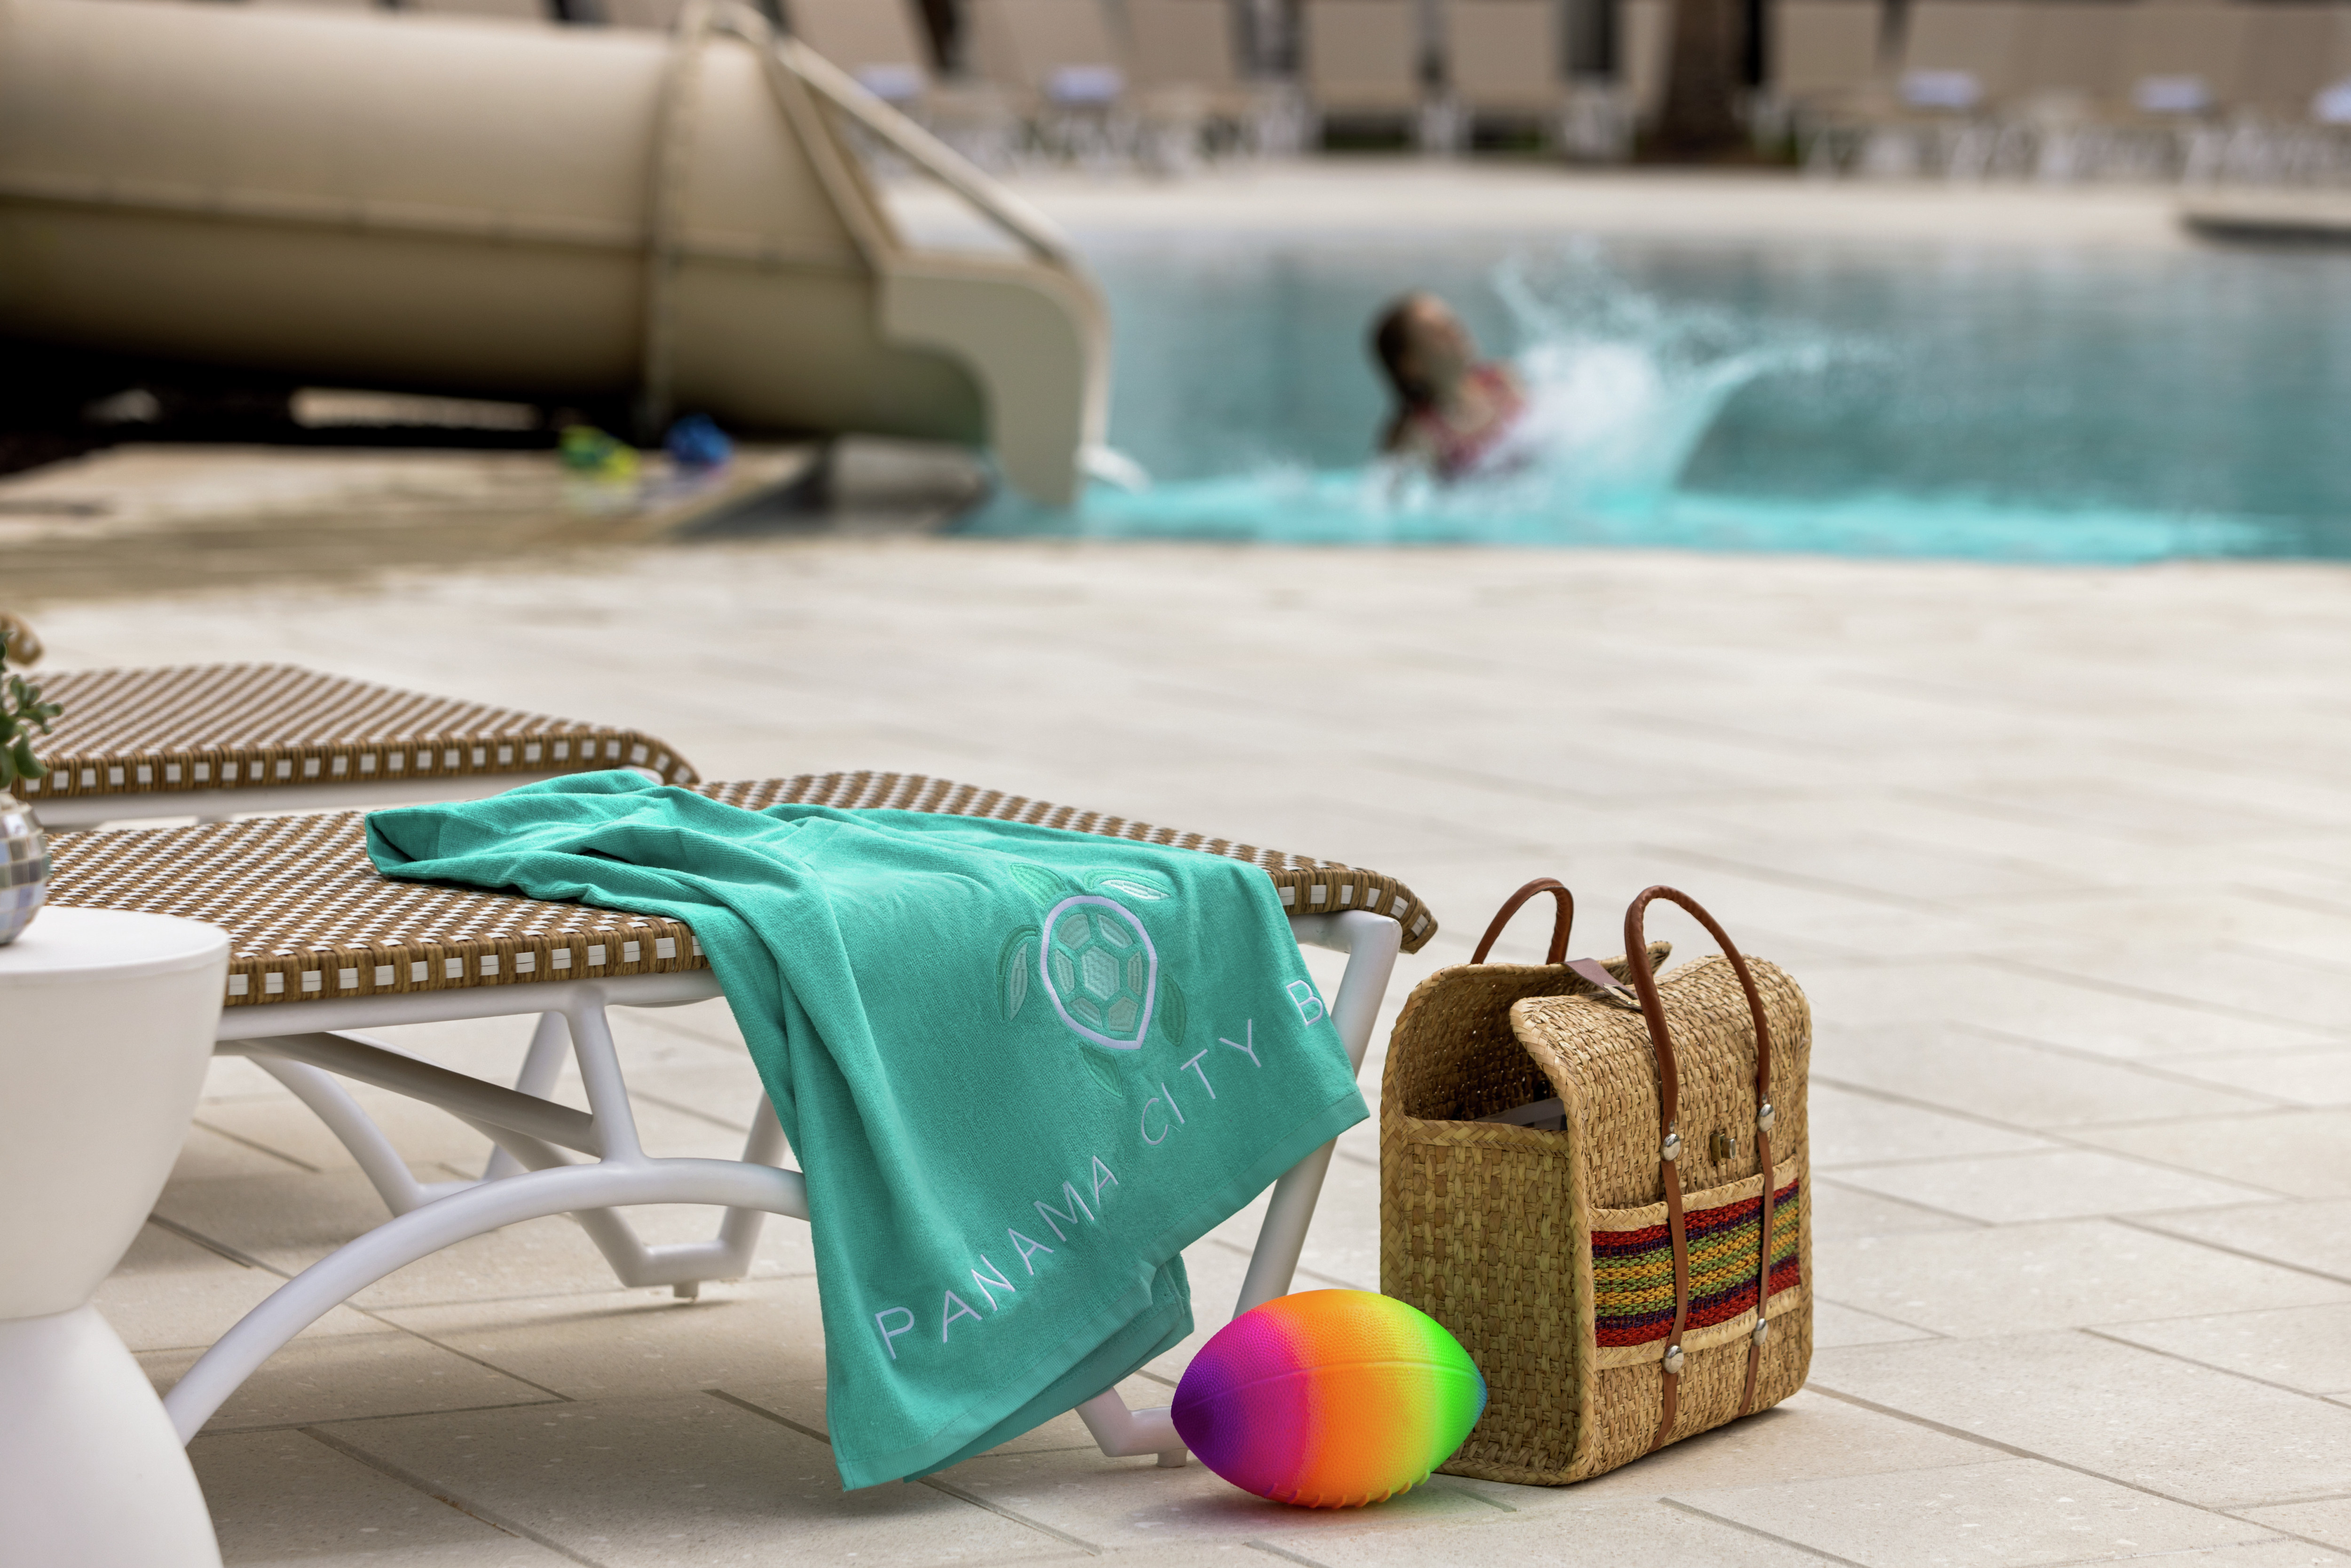 Detail of poolside accesories on lounge seating with a child enjoying the waterslide fun in the pool